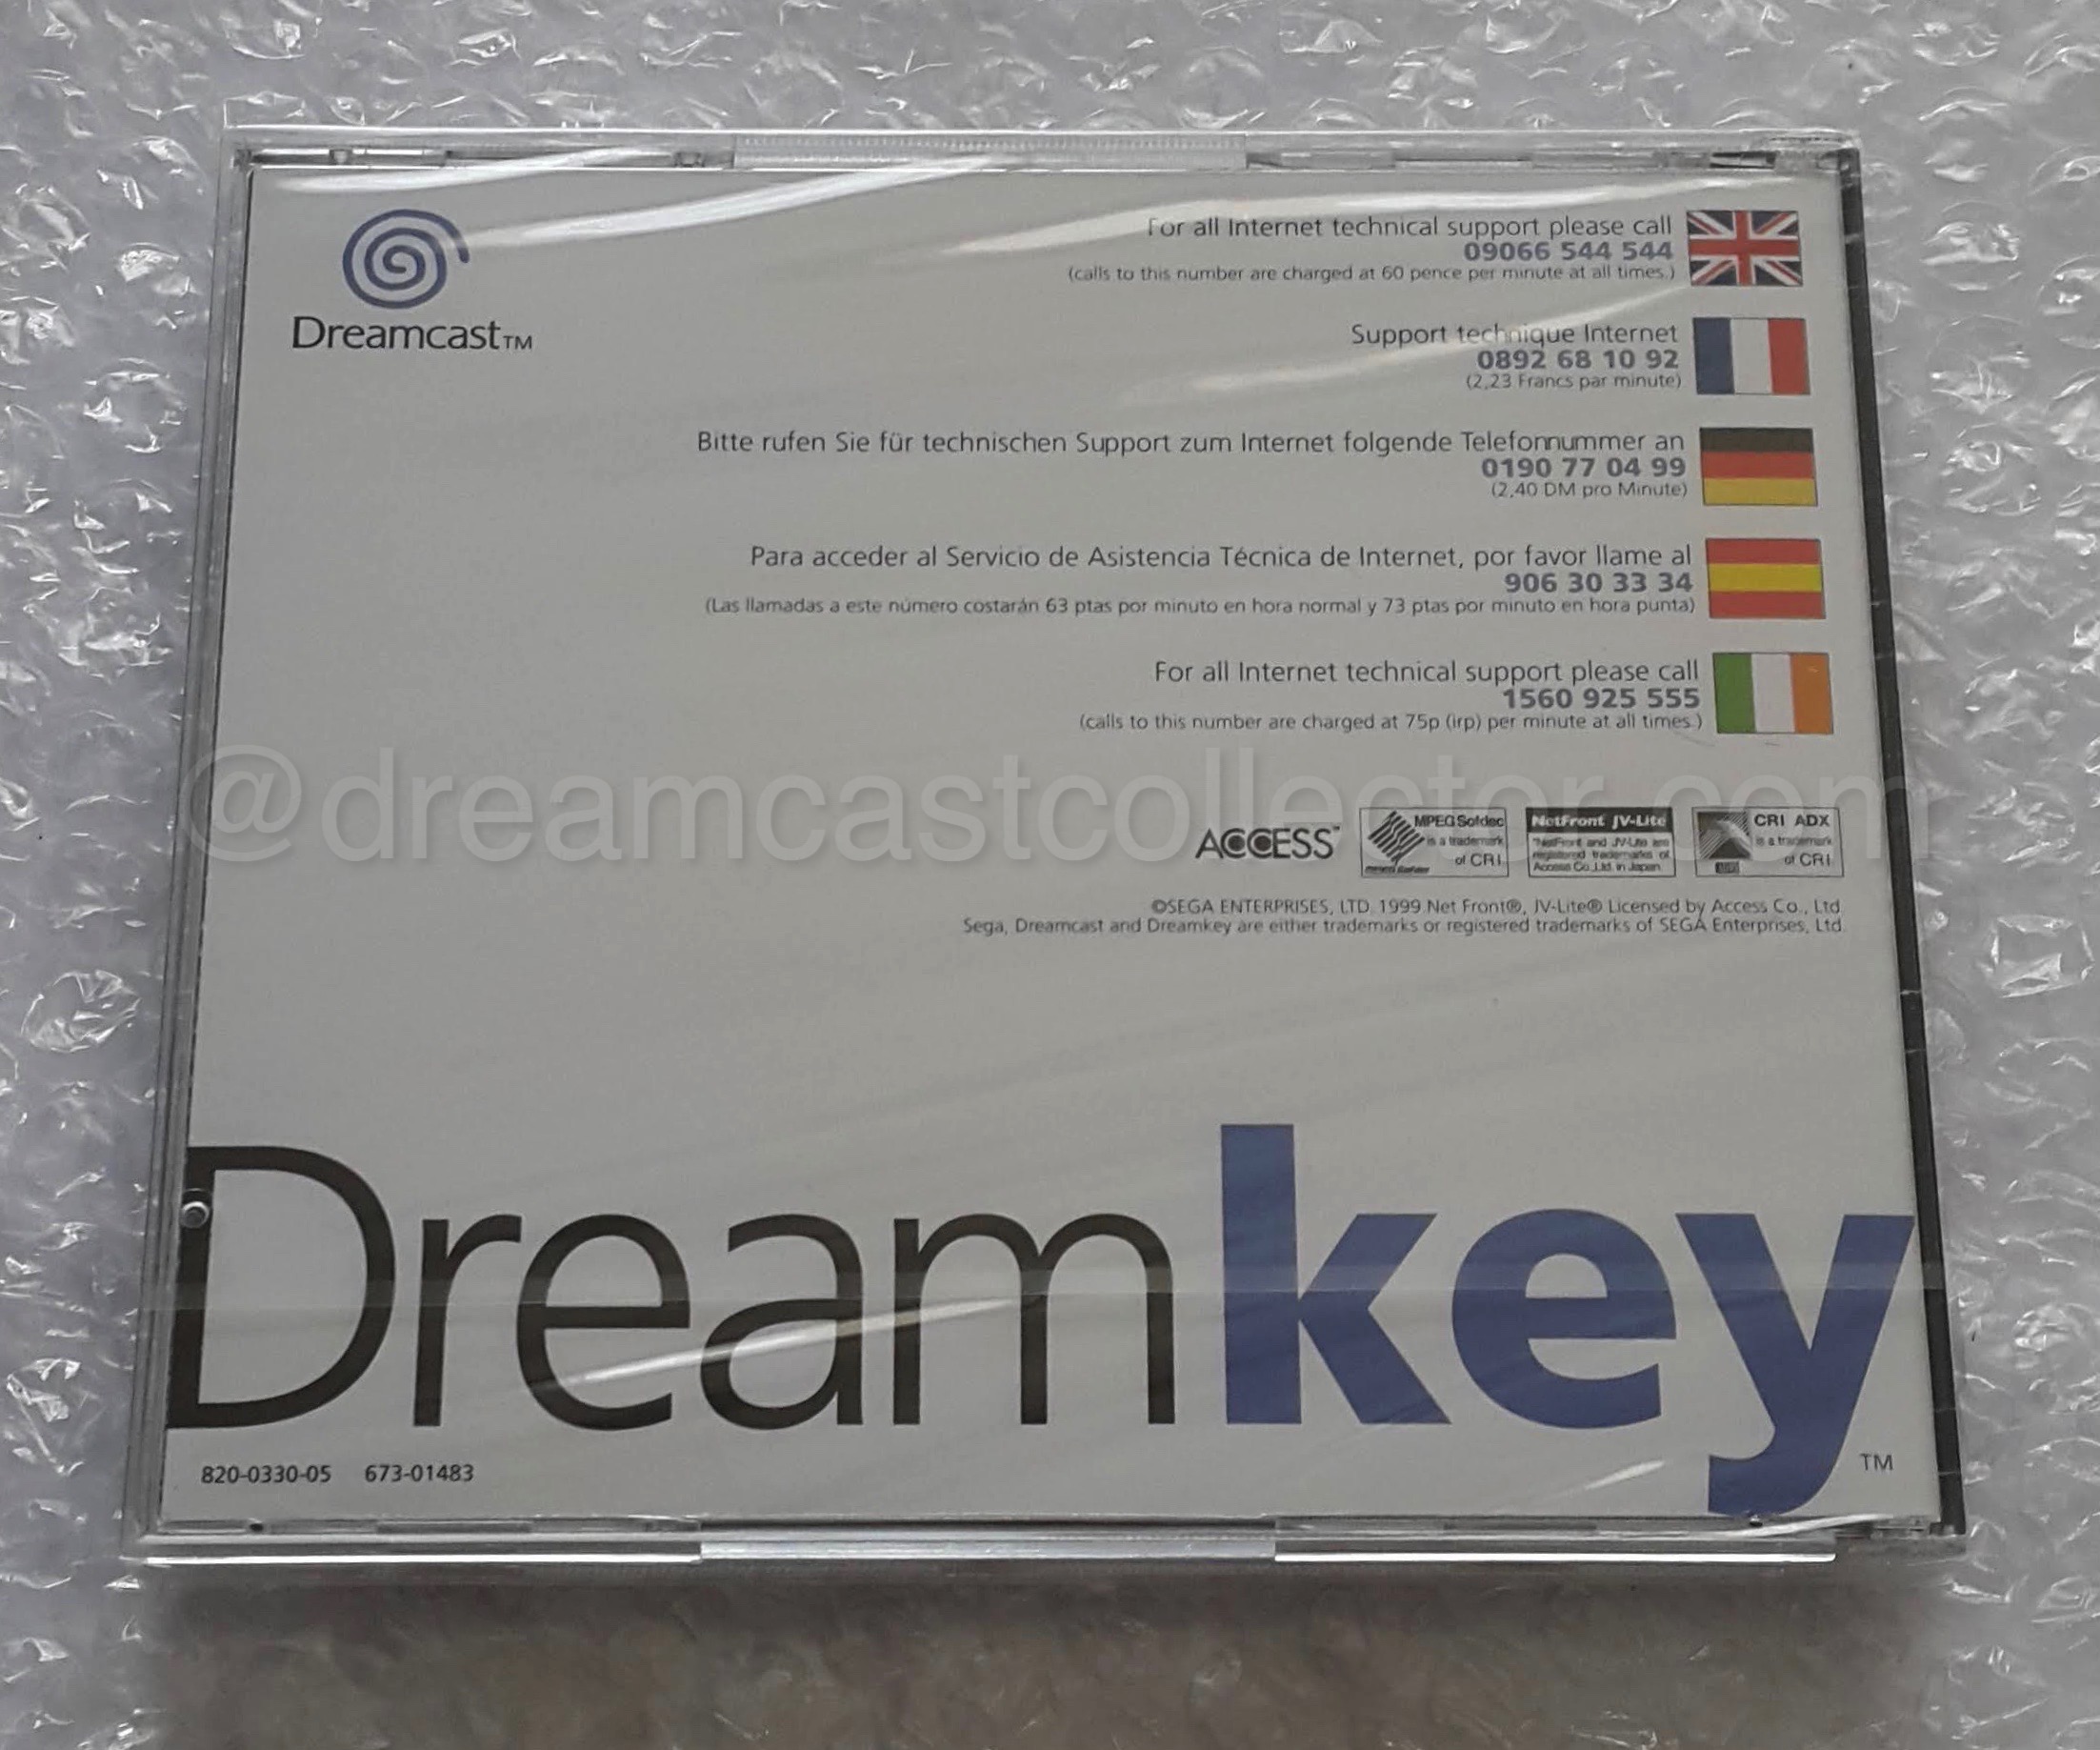 The rear cover of this updated iteration of the browser is basically a carbon copy of the original Dreamkey with only the Irish flag & support detail added. While I understand this edition was issued for a specific reason SEGA could’ve made more of an effort with regards to the packaging.